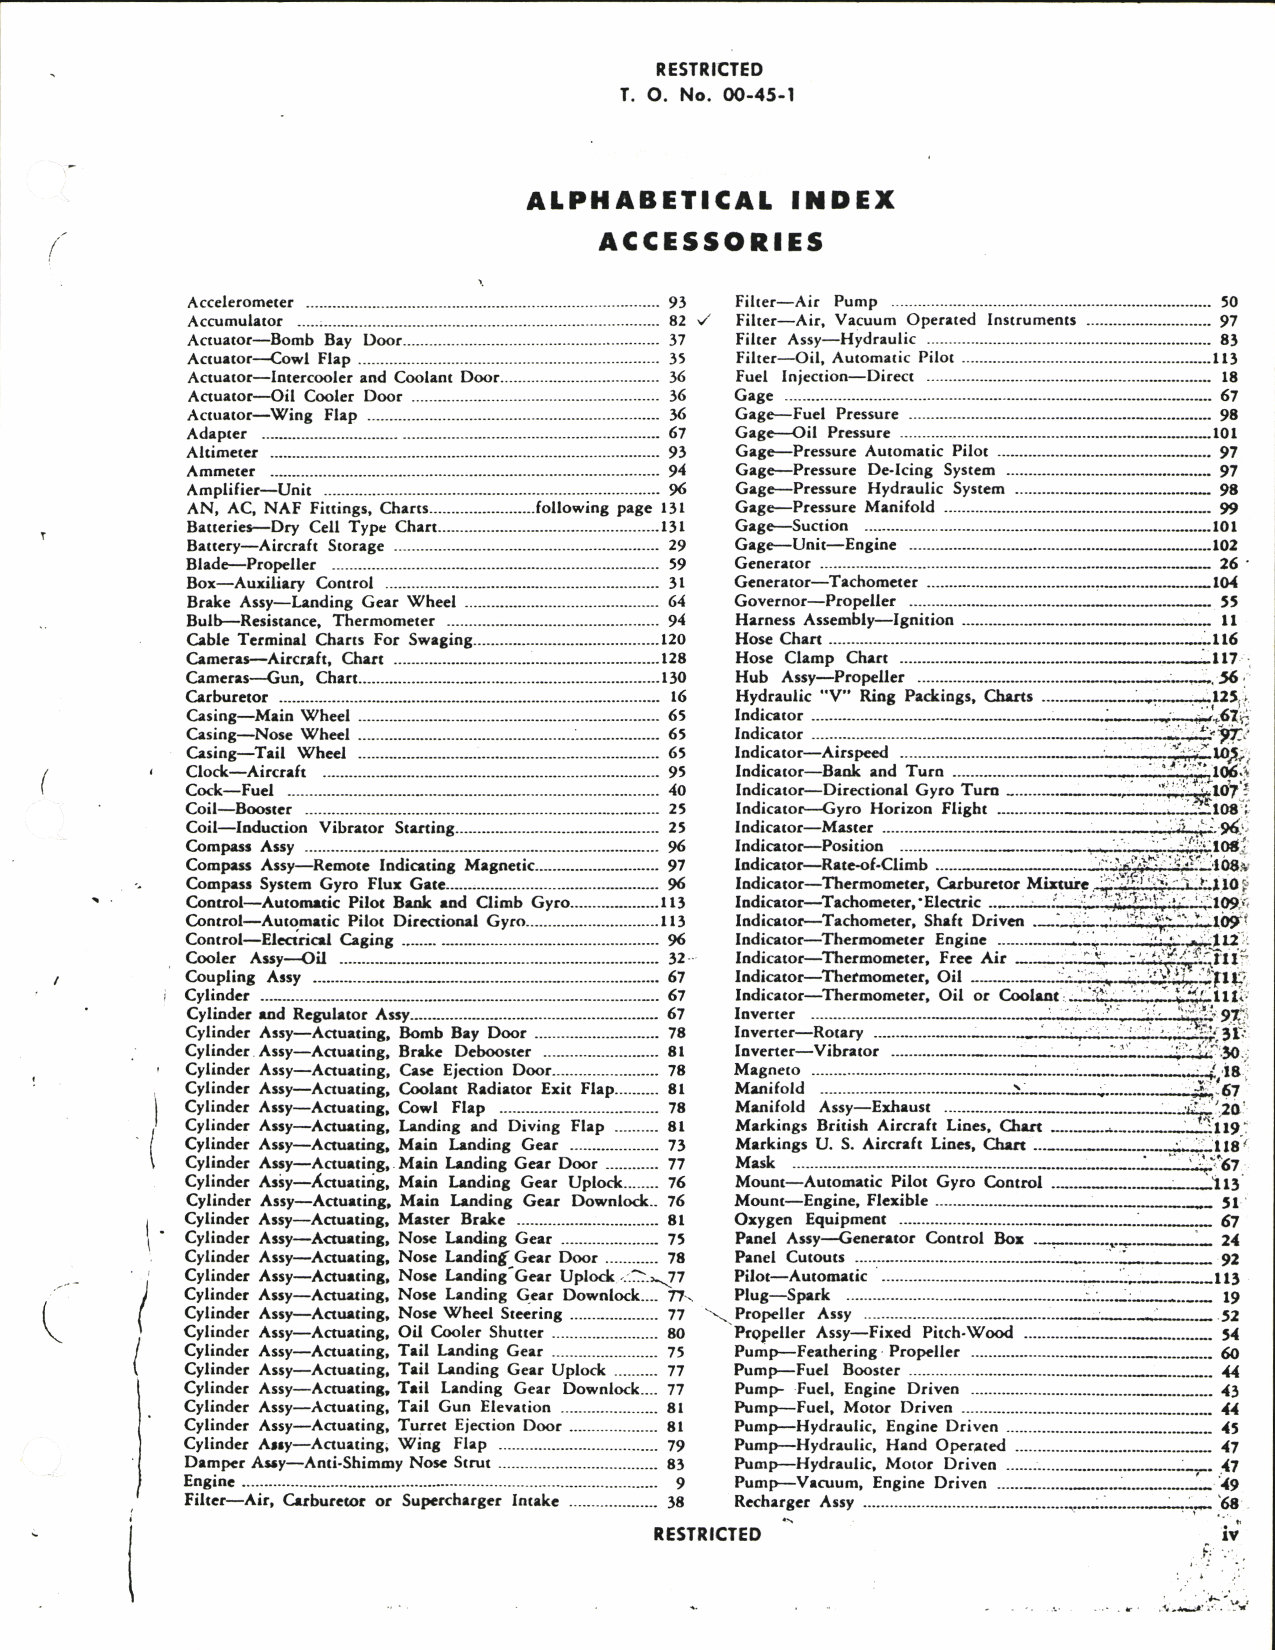 Sample page 7 from AirCorps Library document: Accessories for Airplanes; Engines Interchangeability Charts Listing Original and Cross reference Charts